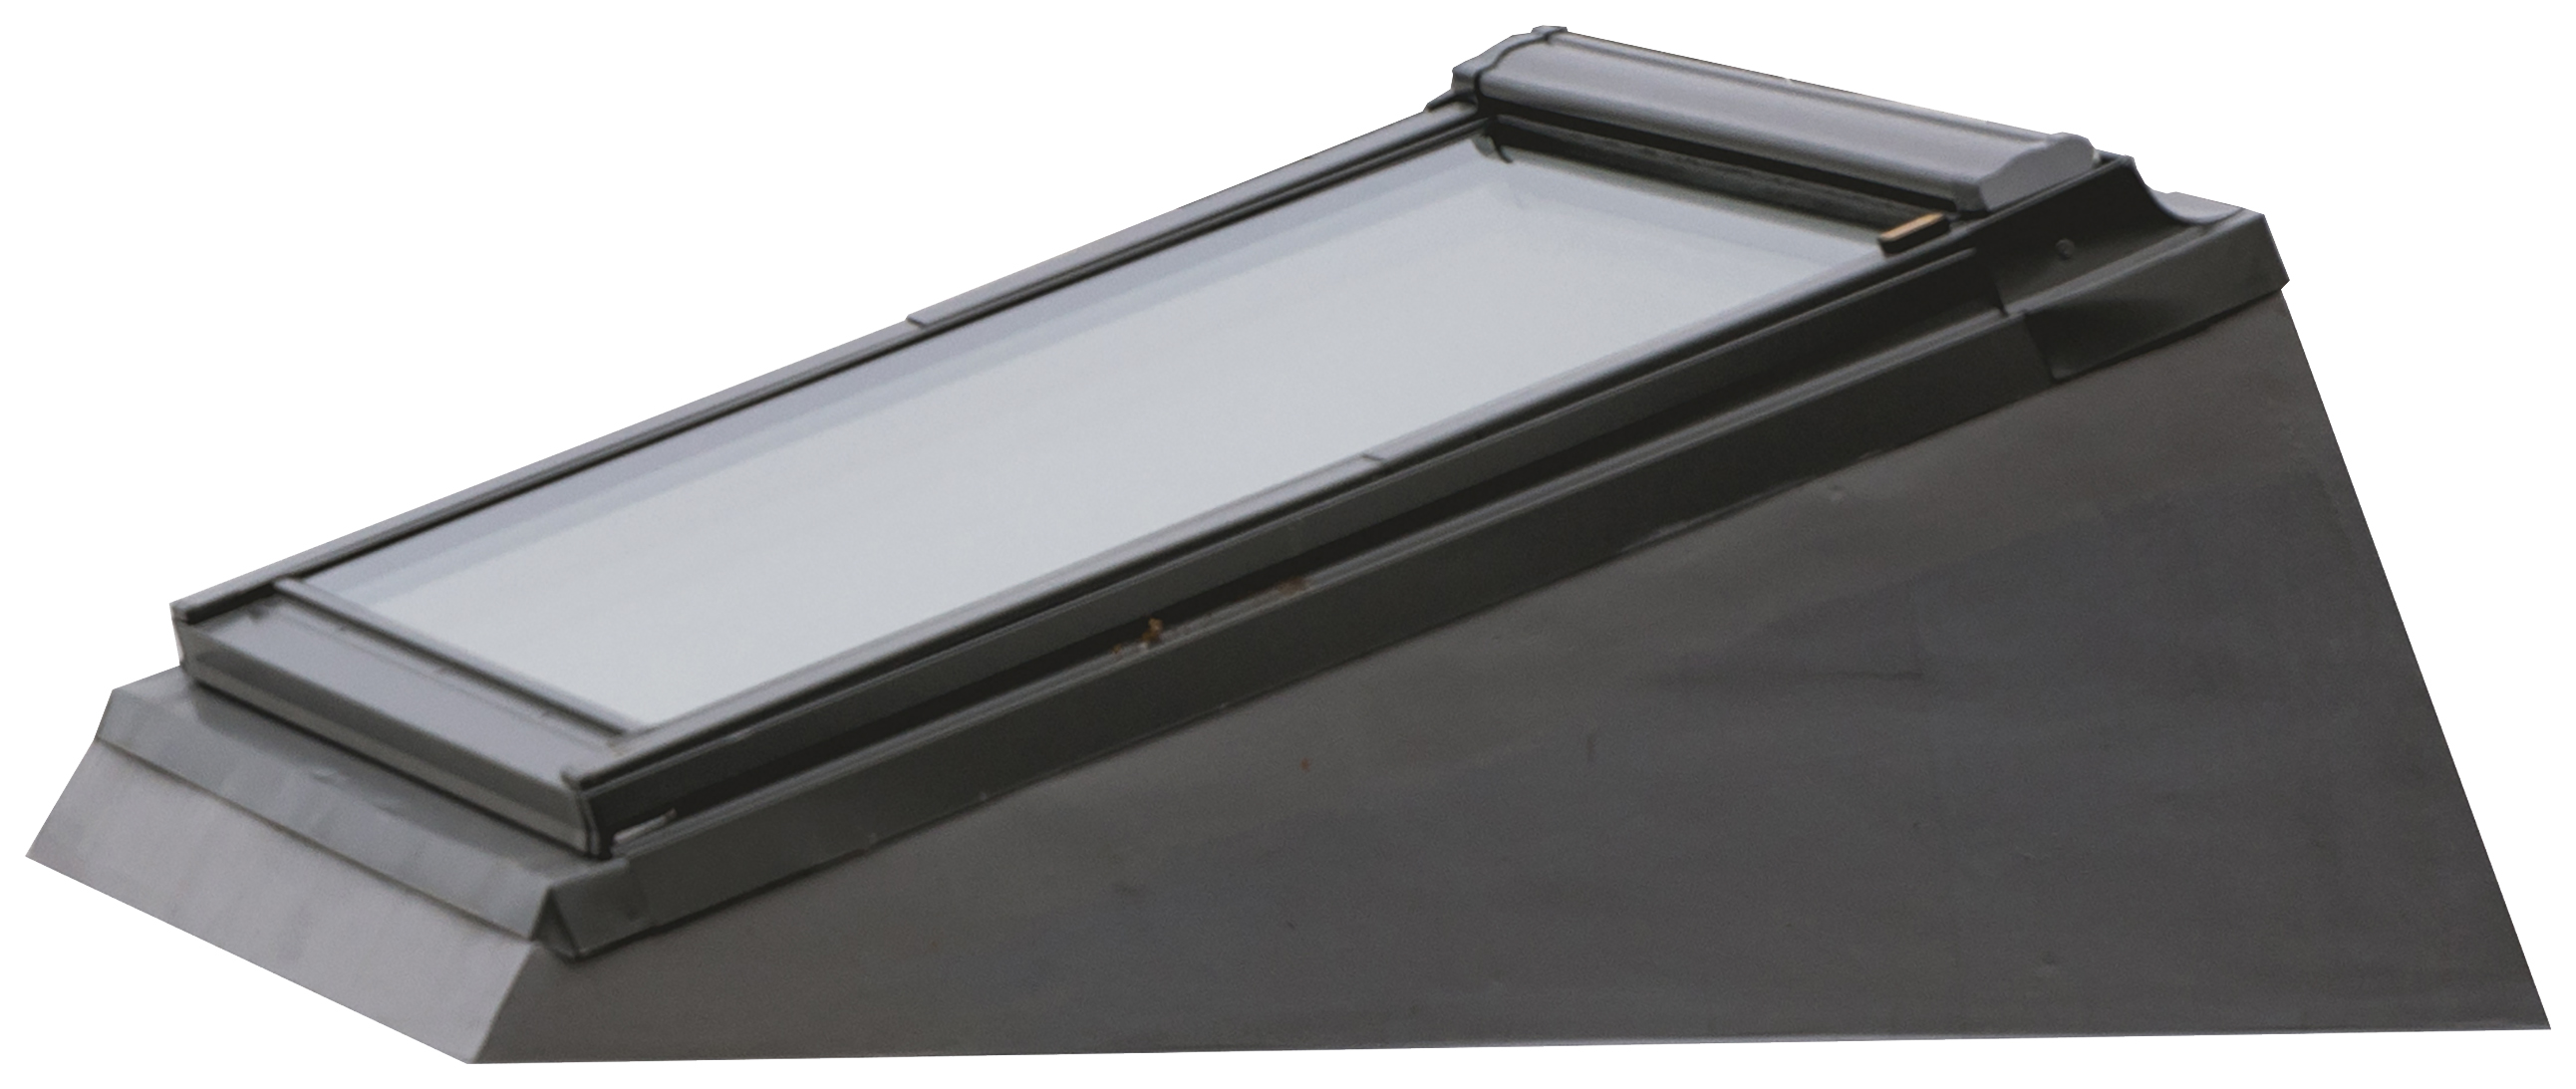 Image of Keylite FRS 04 Flat Roof System - 780 X 980mm